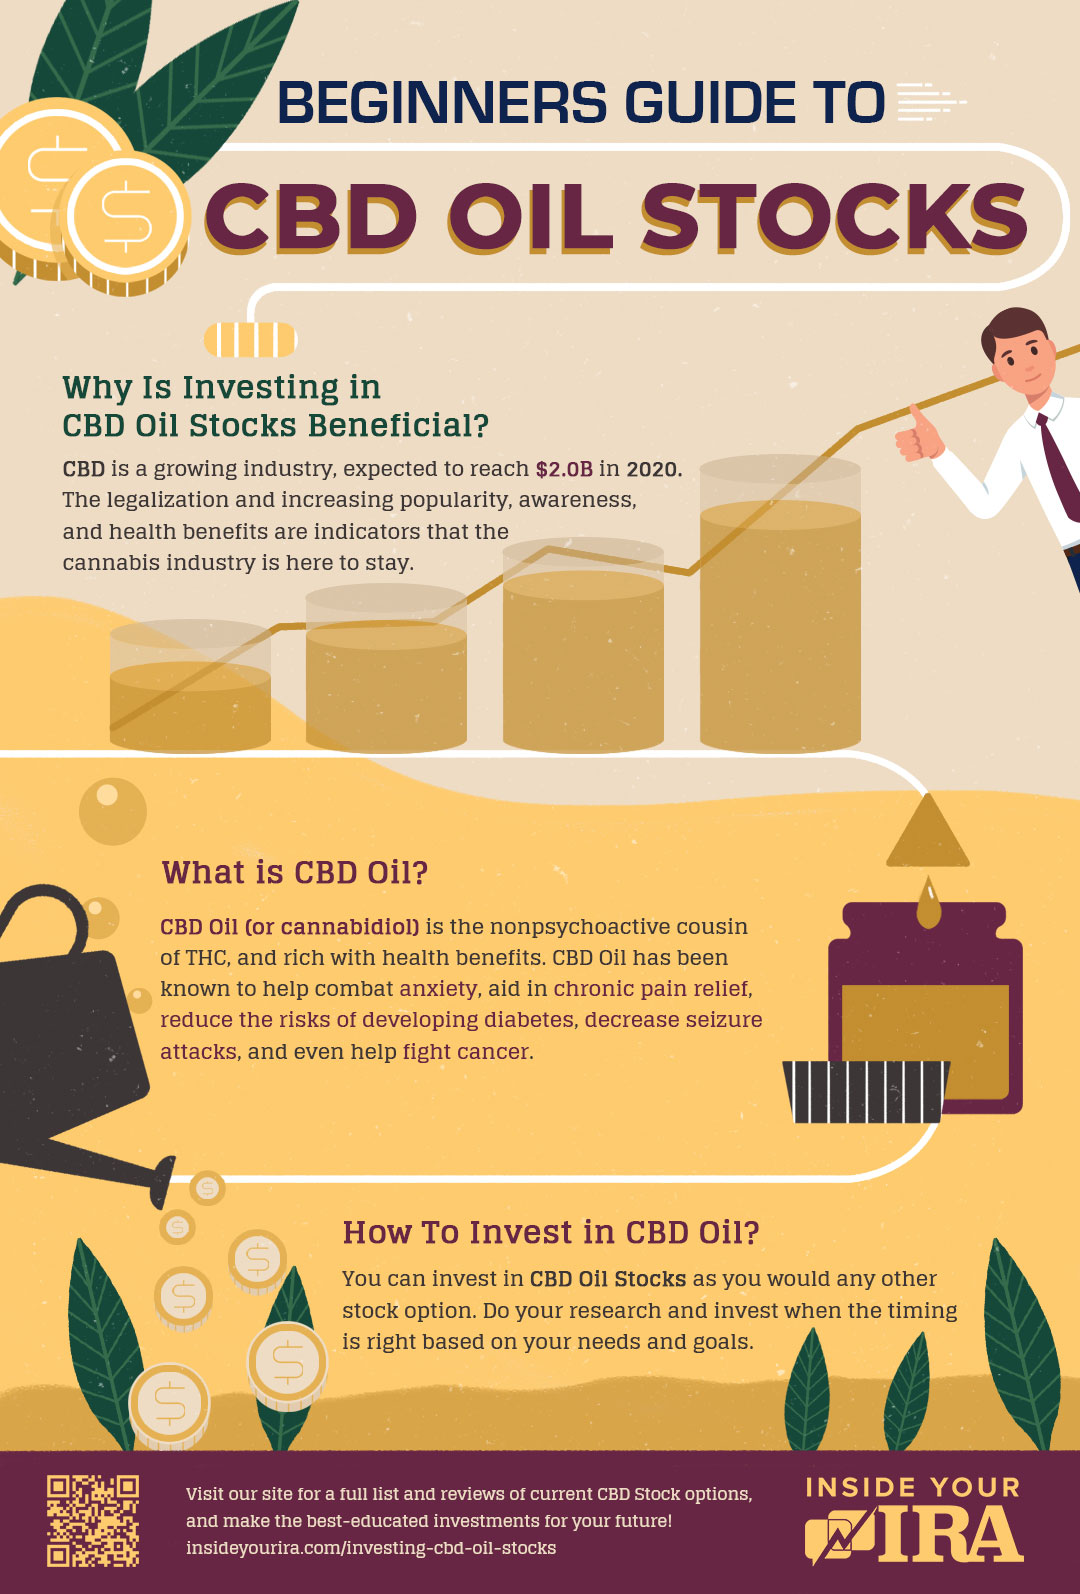 How To Invest In Cbd Oil Stocks